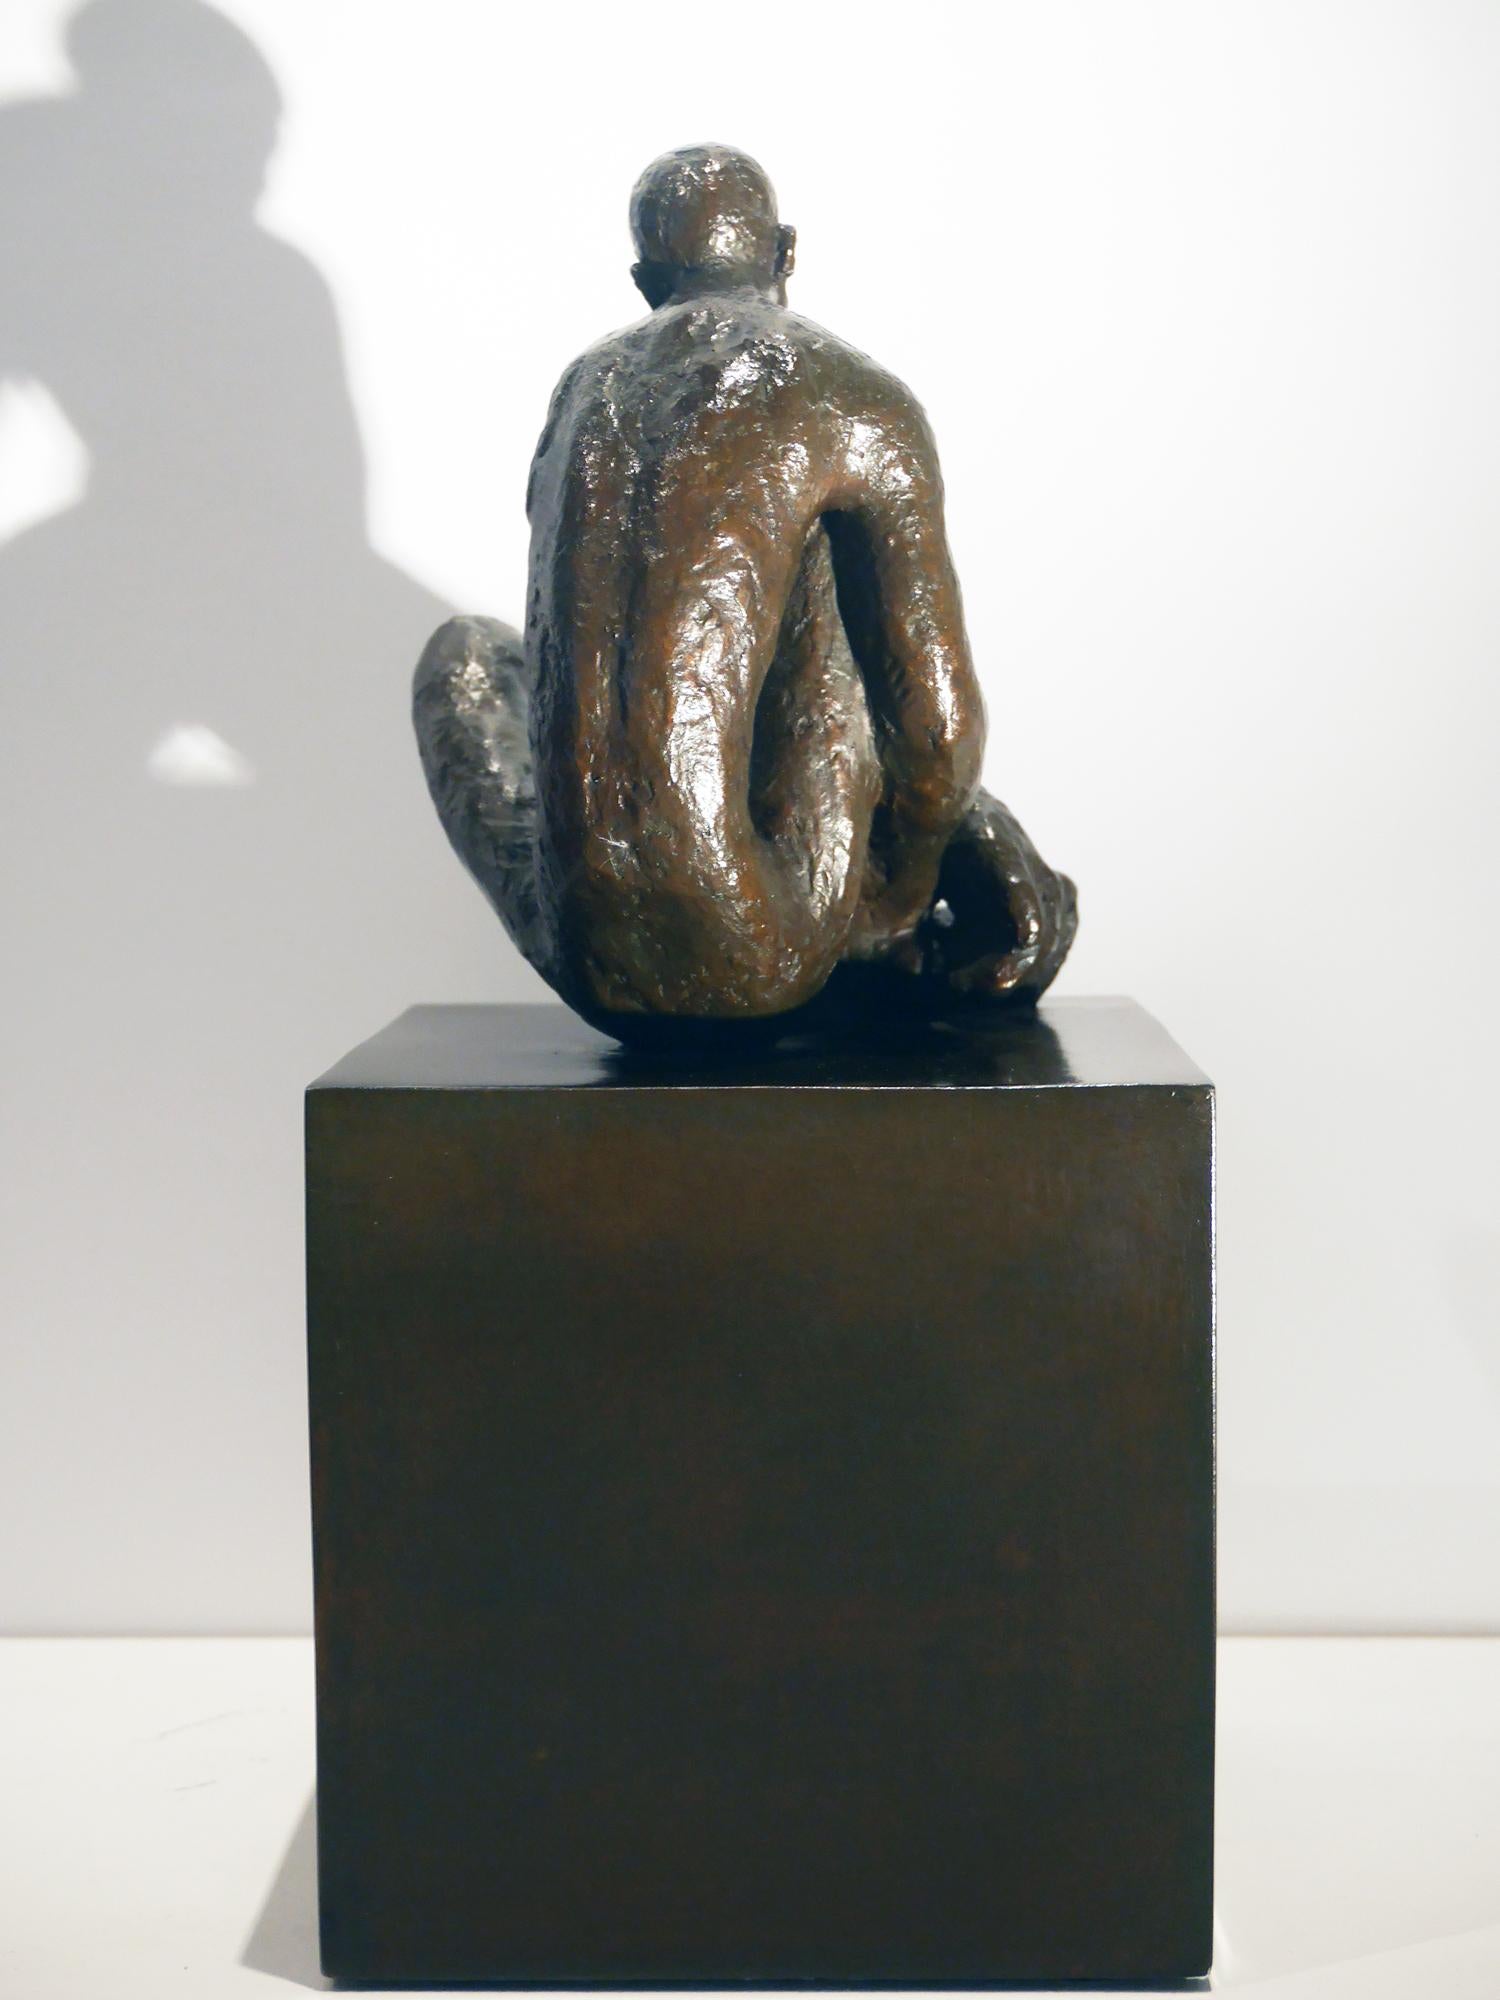 Le Méditatif is a bronze by the French contemporary artist, Maguy Banq.
Edition 8/8.

The existentialism is in the center of Maguy Banq approach: the human being is predestined for nothing, he looks indefatigably for his purpose, for his reason for